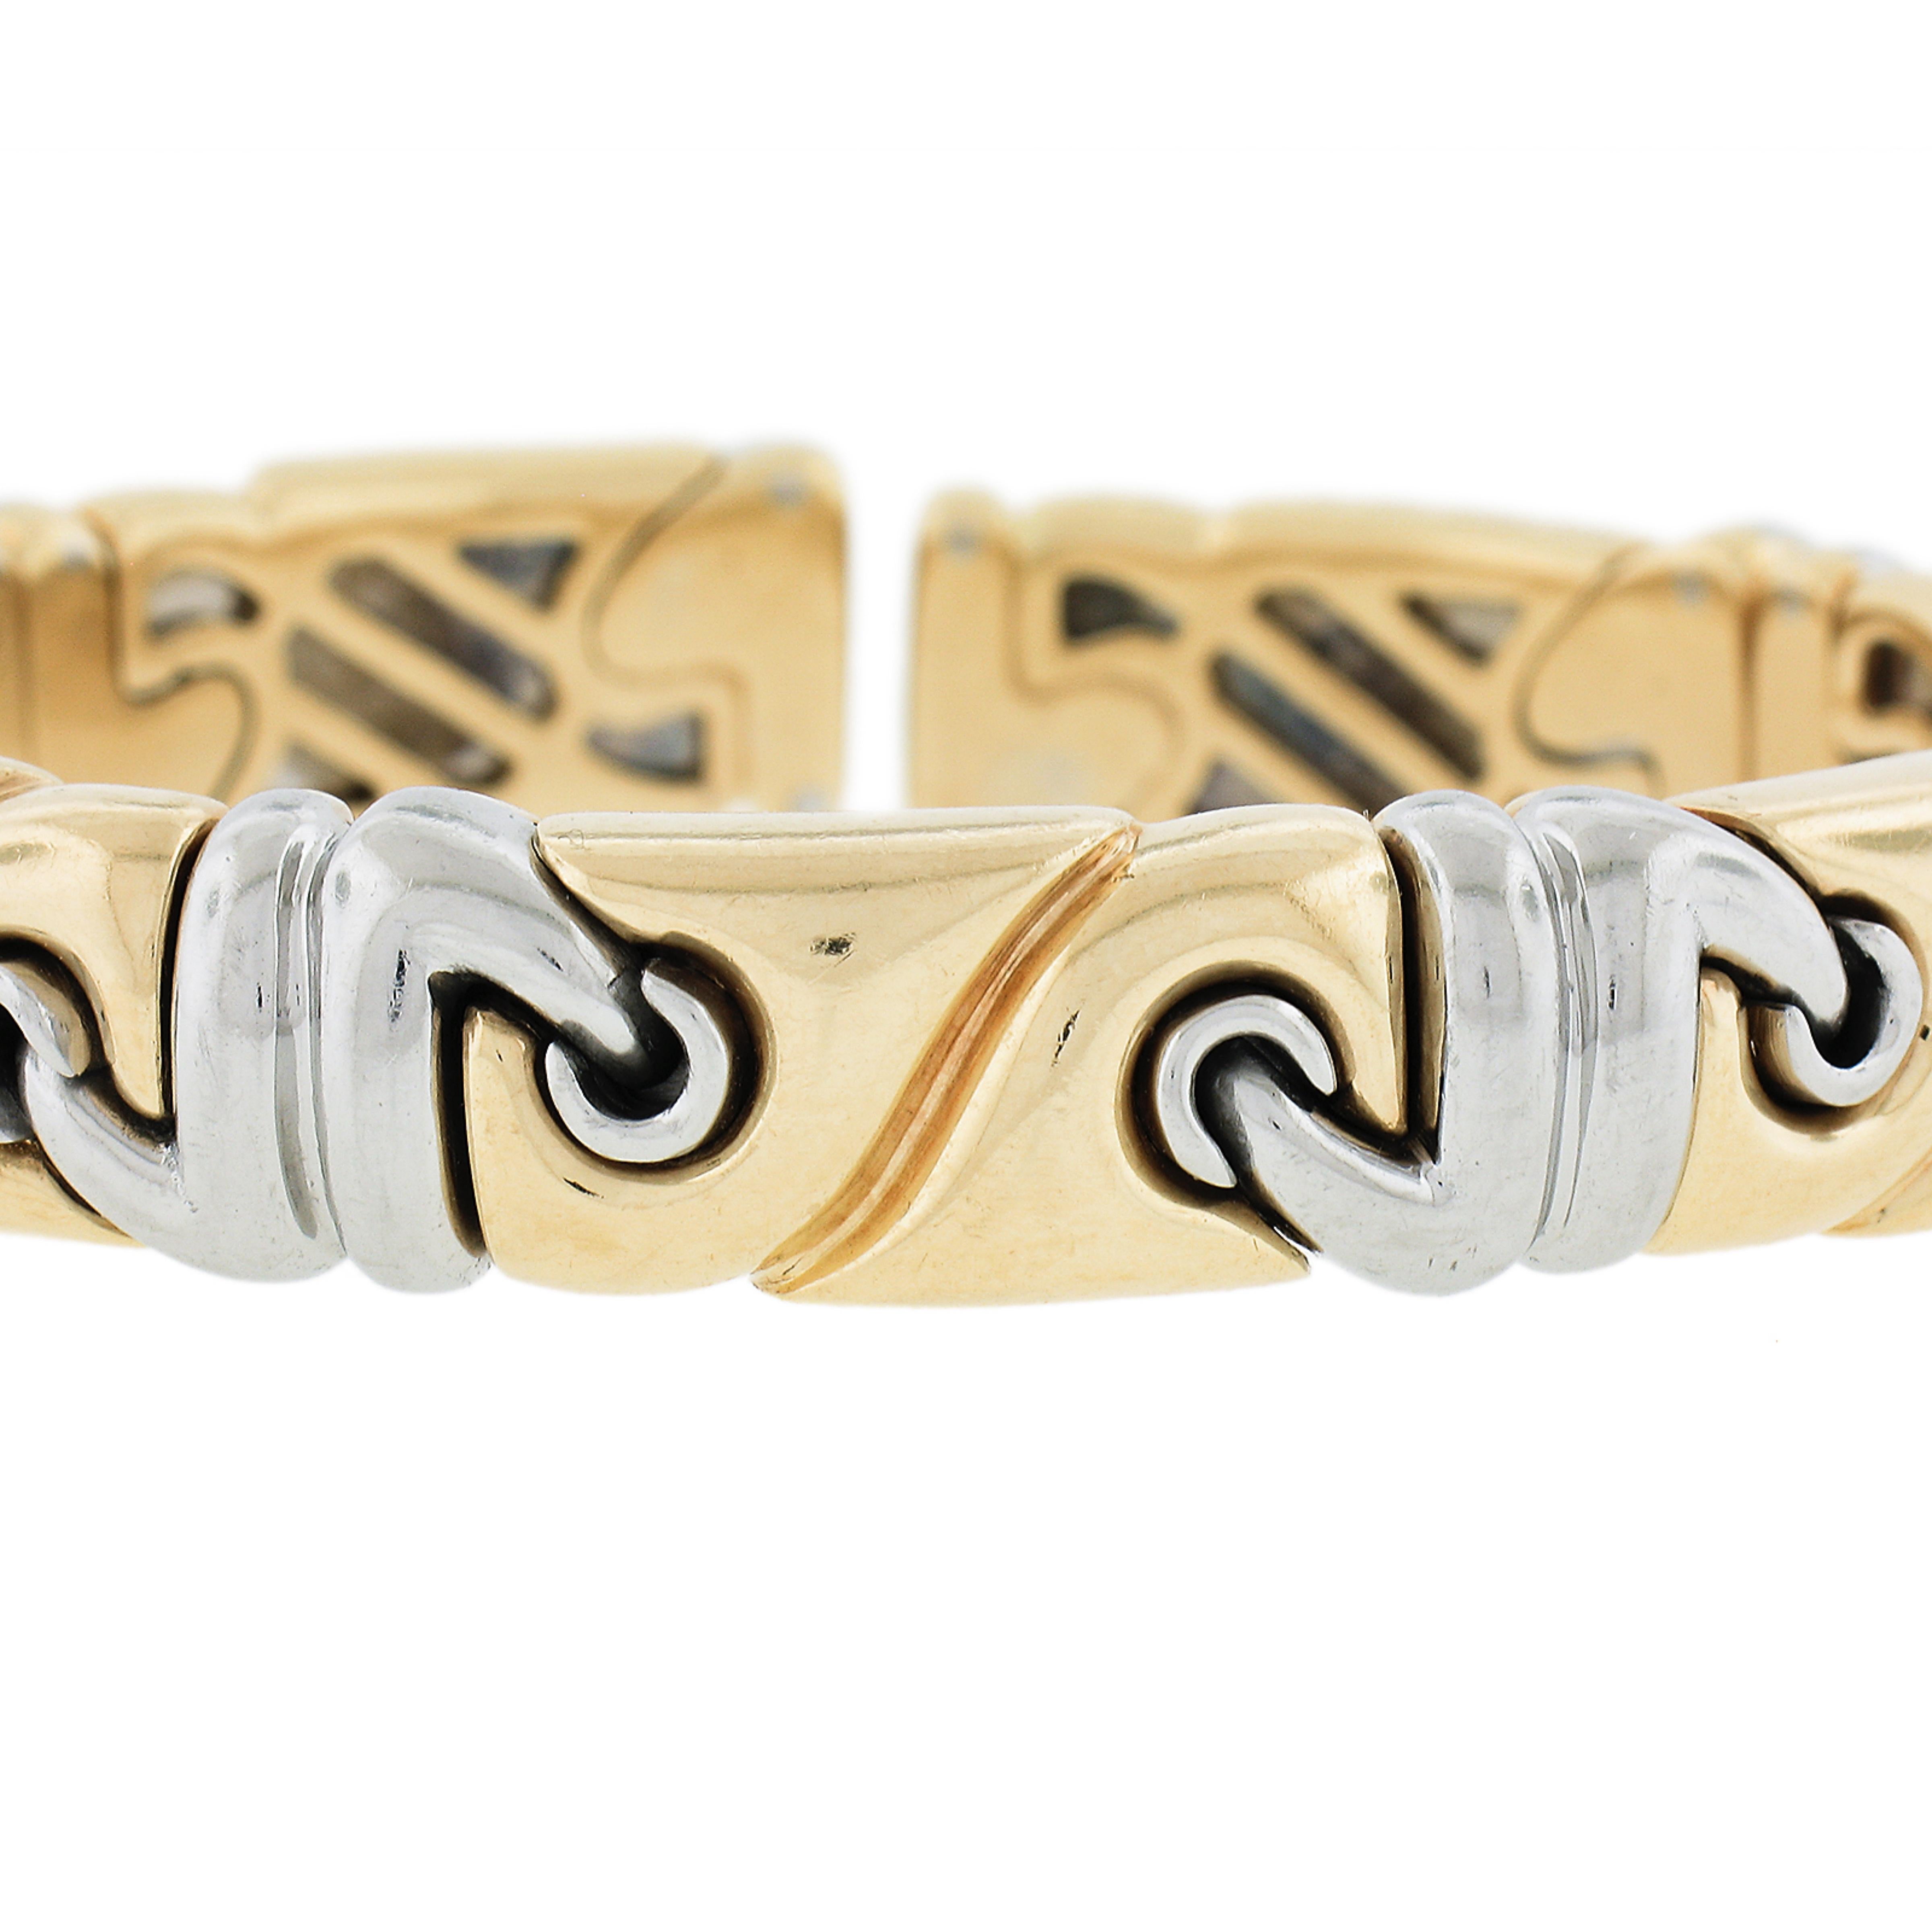 Material: Solid 18K Yellow Gold and Stainless Steel
Weight: 48.8 Grams
Type: Open Cuff Bangle
Size: Will fit up to a 6-7 inch wrist fitted on a wrist
Clasp: No Clasp  Open Cuff
Overall Width: 10.6mm 0.41 Inches 
Thickness: 5.1mm
Stamp: Bulgari  Made